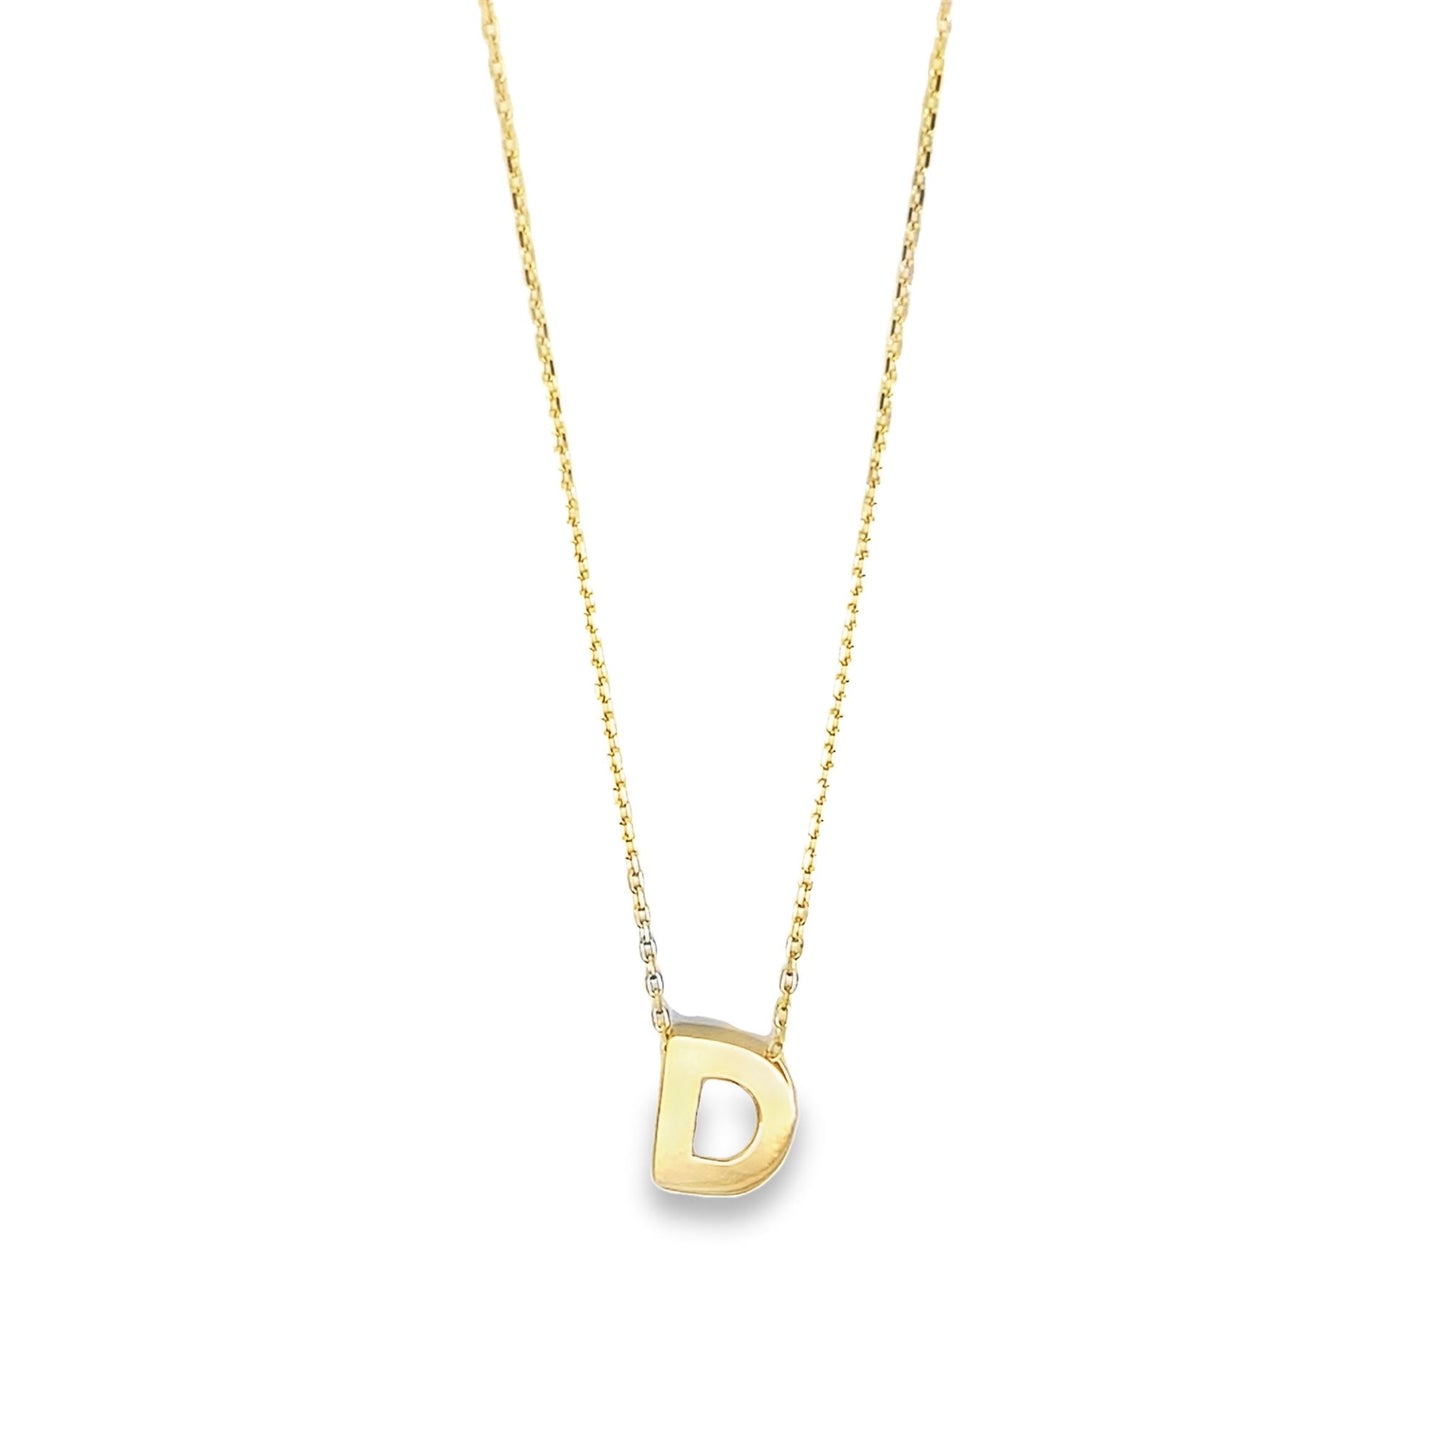 14K Yellow Gold Letter "D" Necklace 18In